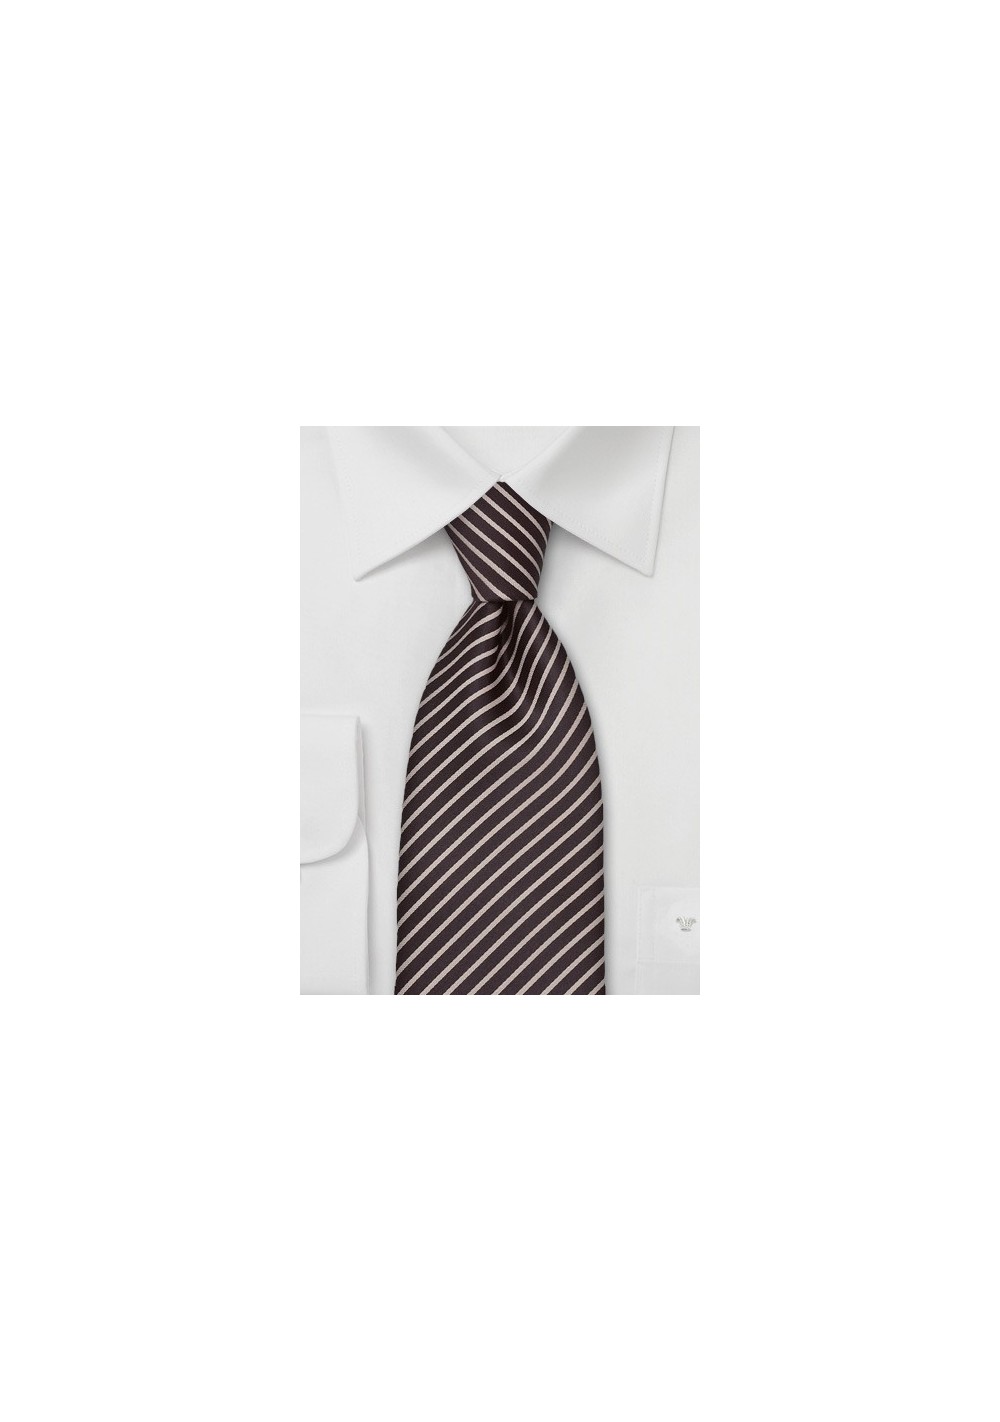 Coffee Brown and Tan Striped Tie